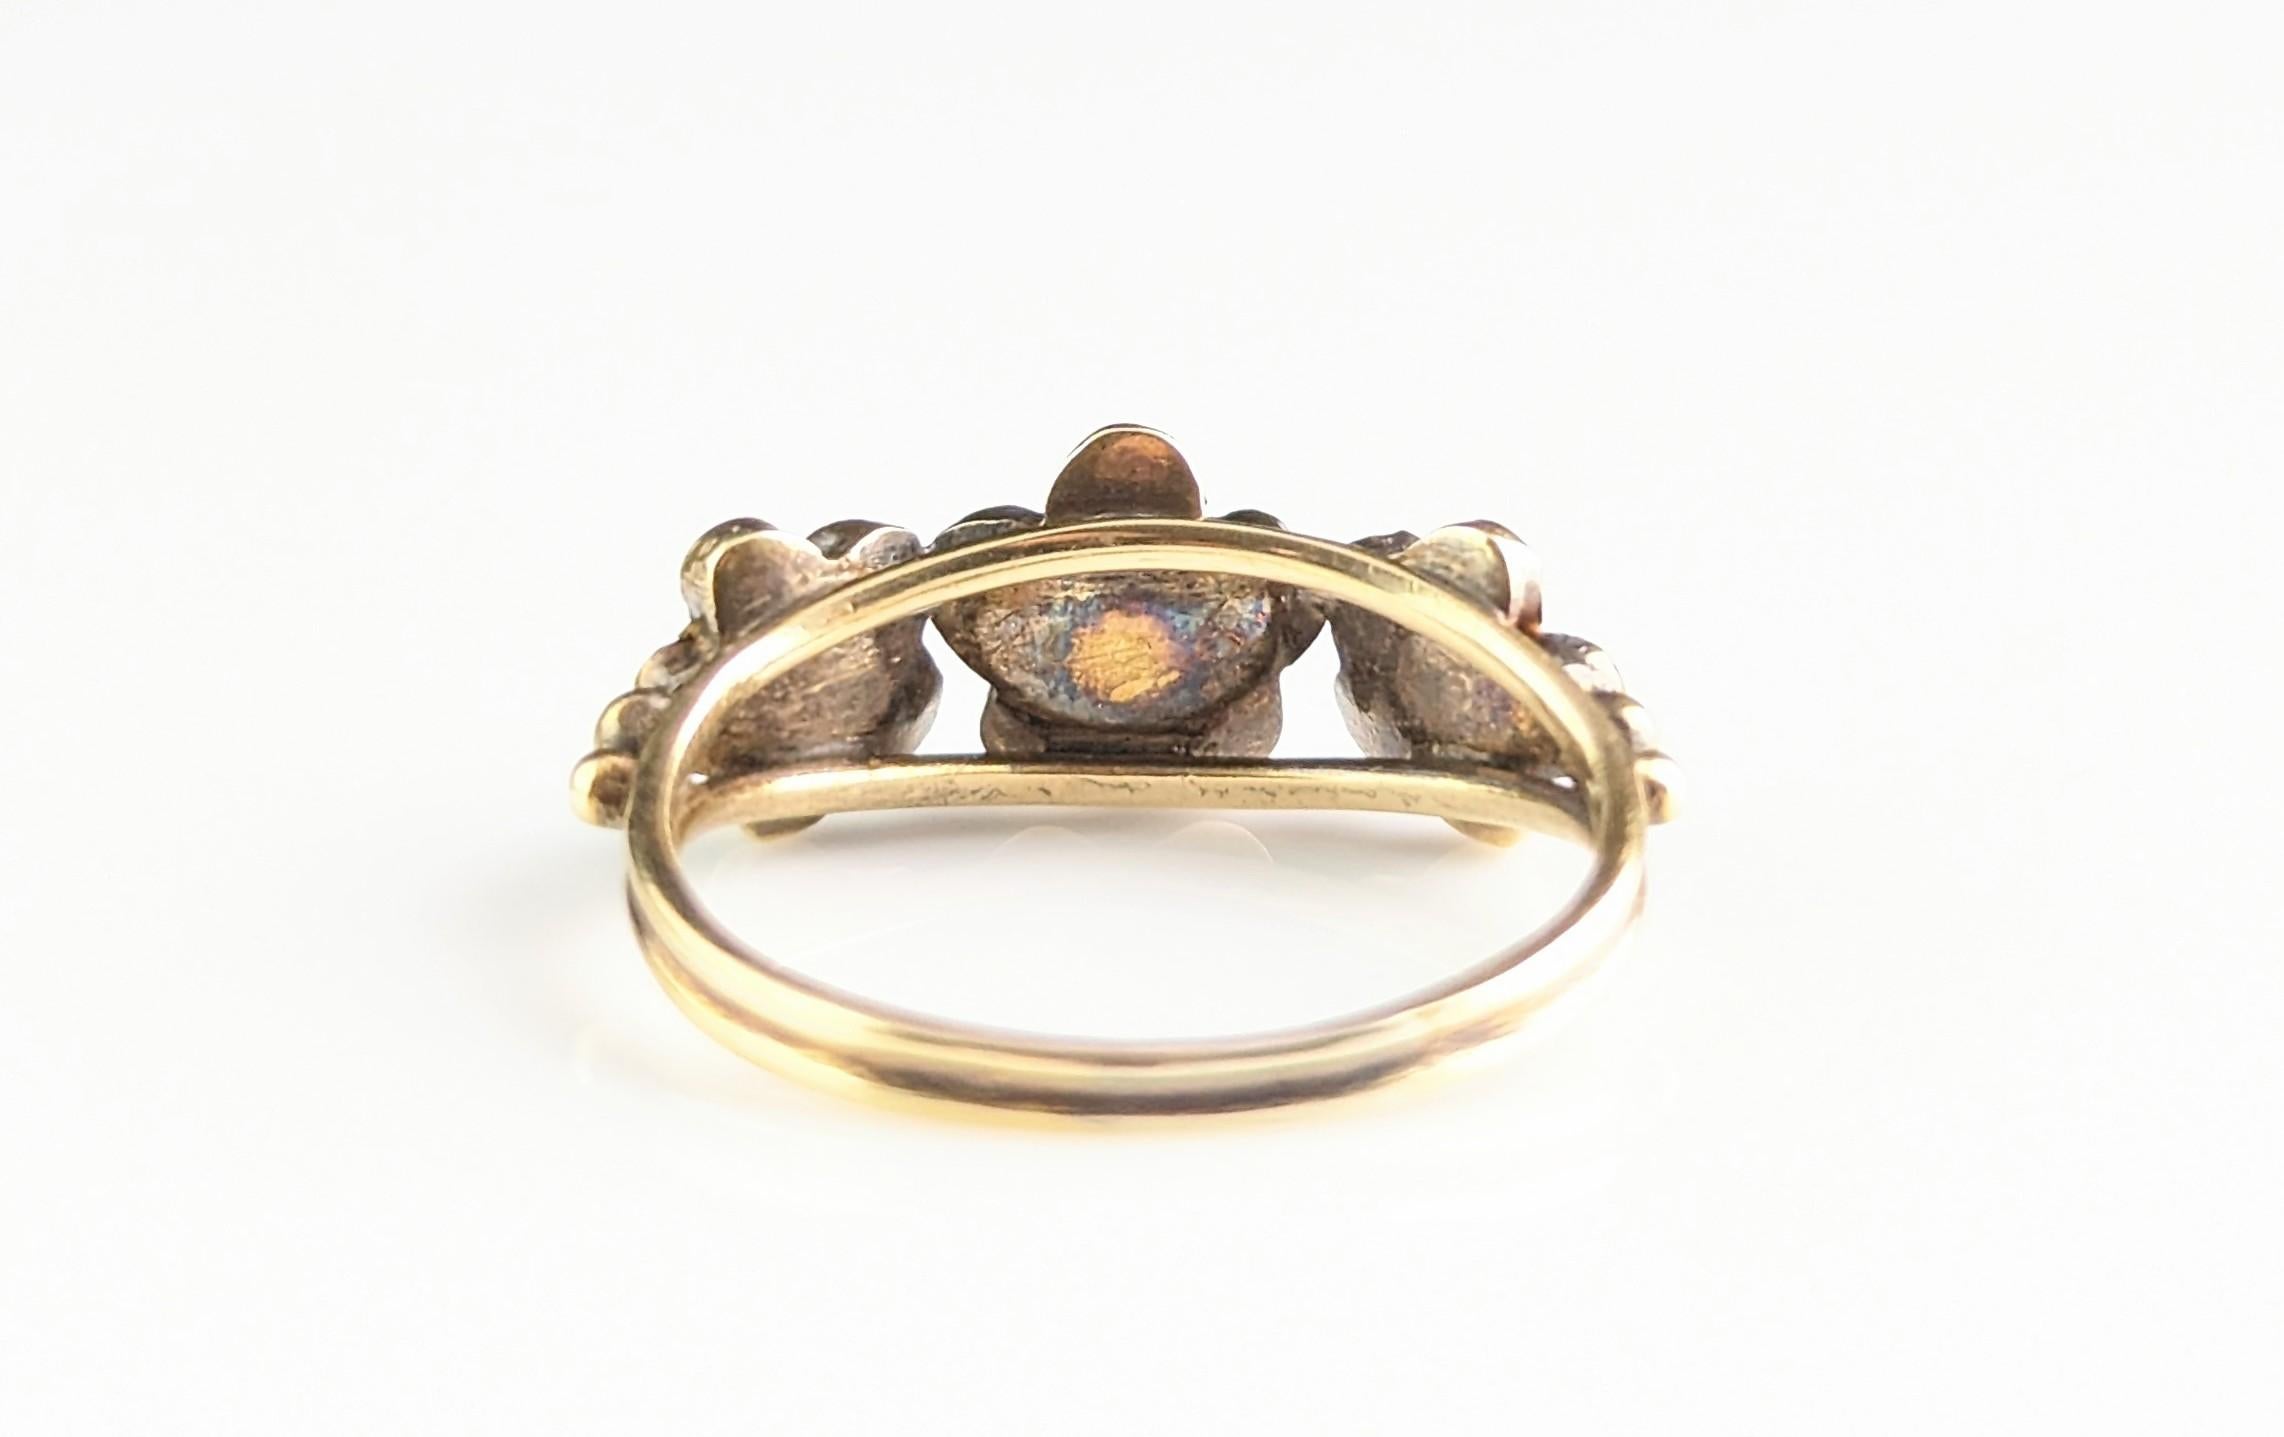 Antique Georgian Triple Flower Ring, Forget Me Not, 18k Gold and Turquoise 9